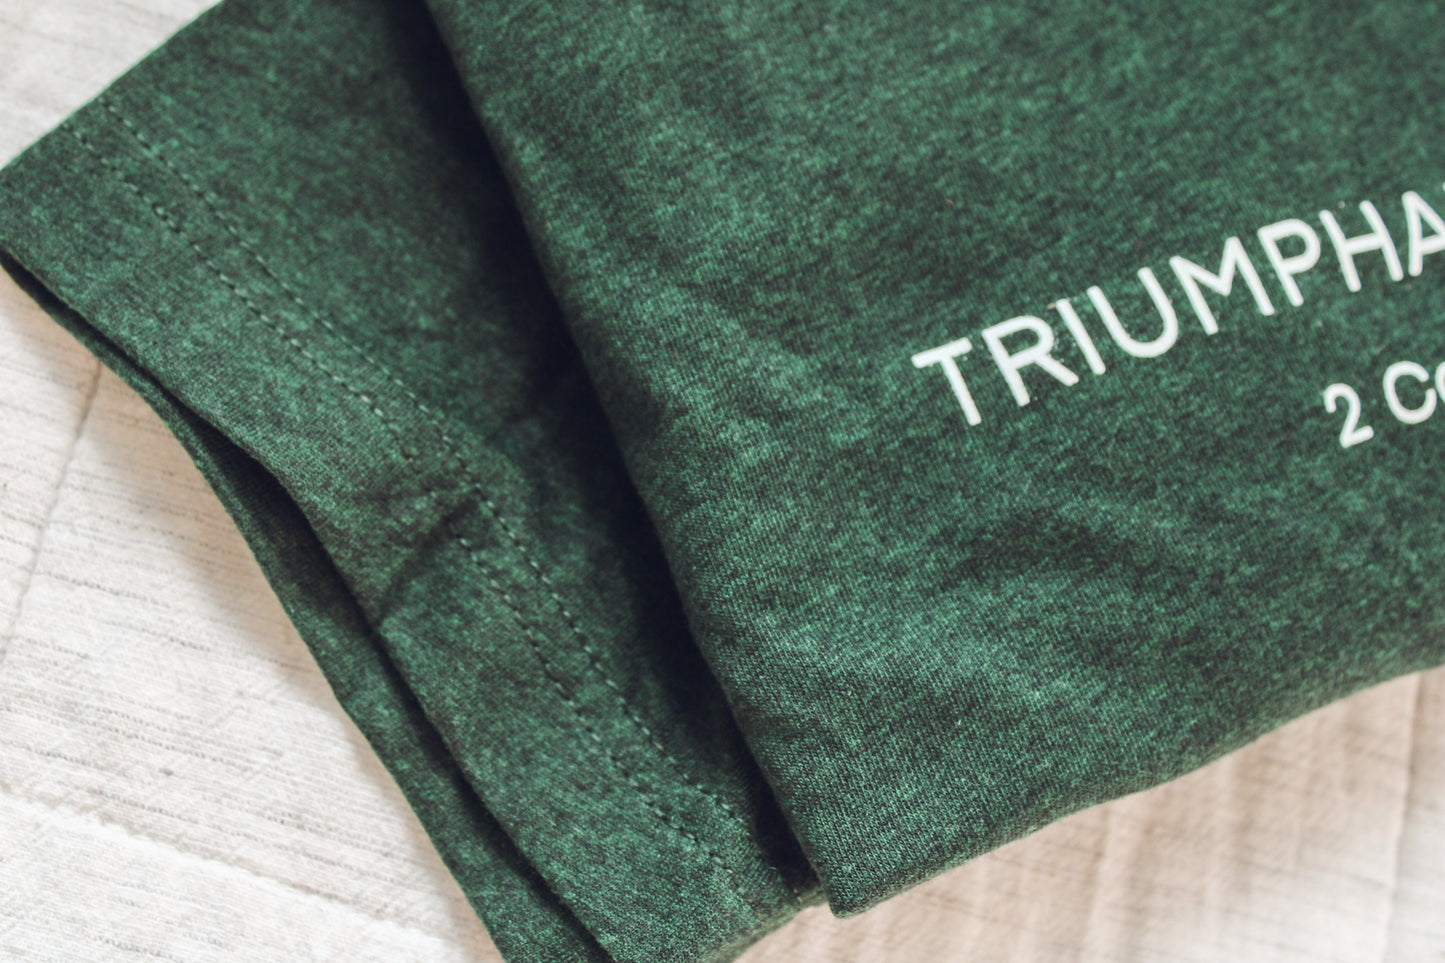 Triumphant in Christ UNISEX Short-Sleeve T-Shirt (Color: Heathered Emerald)